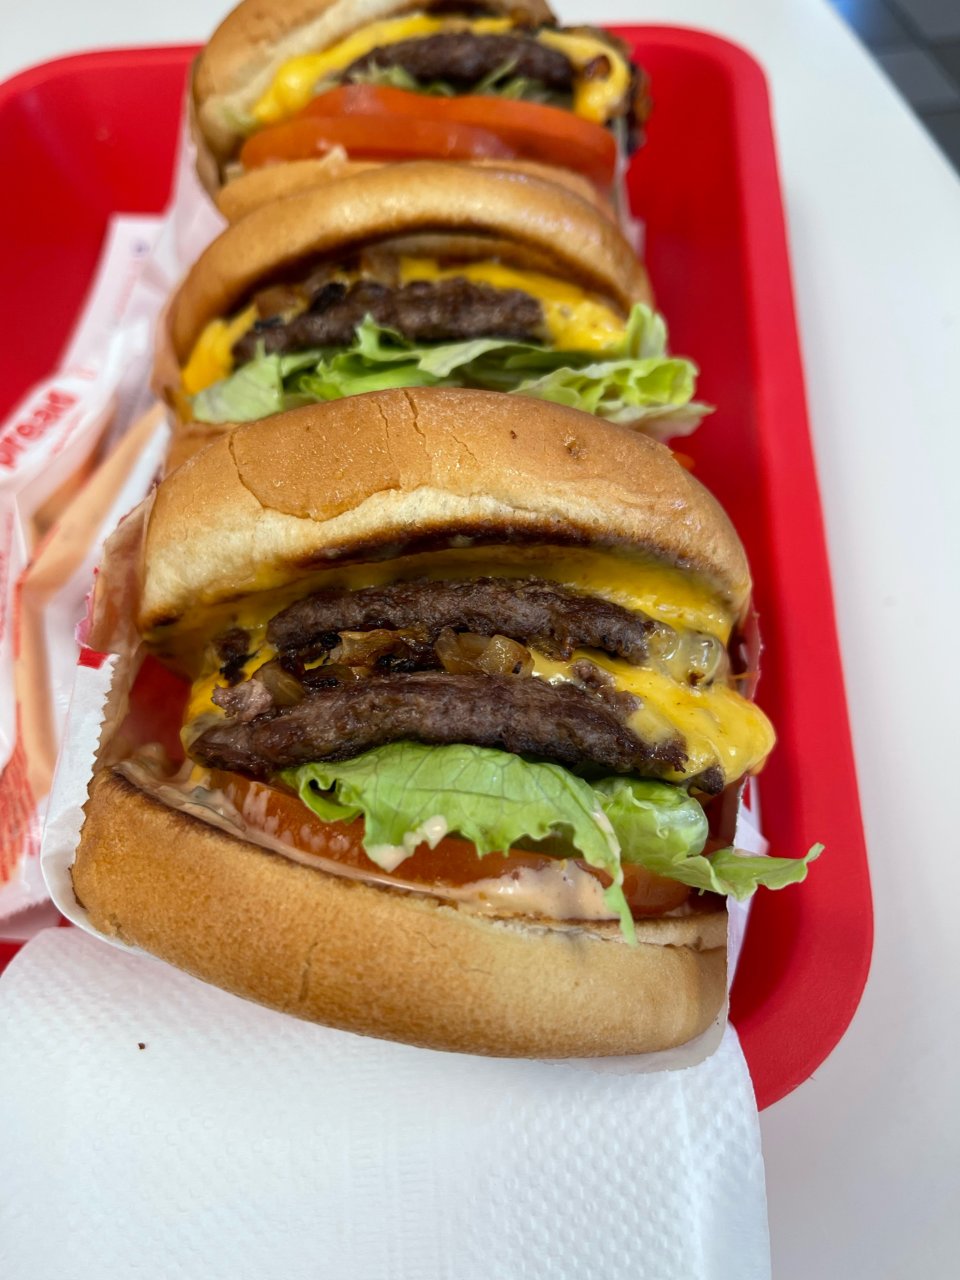 IN-N-OUT BURGER,In-N-Out Burger